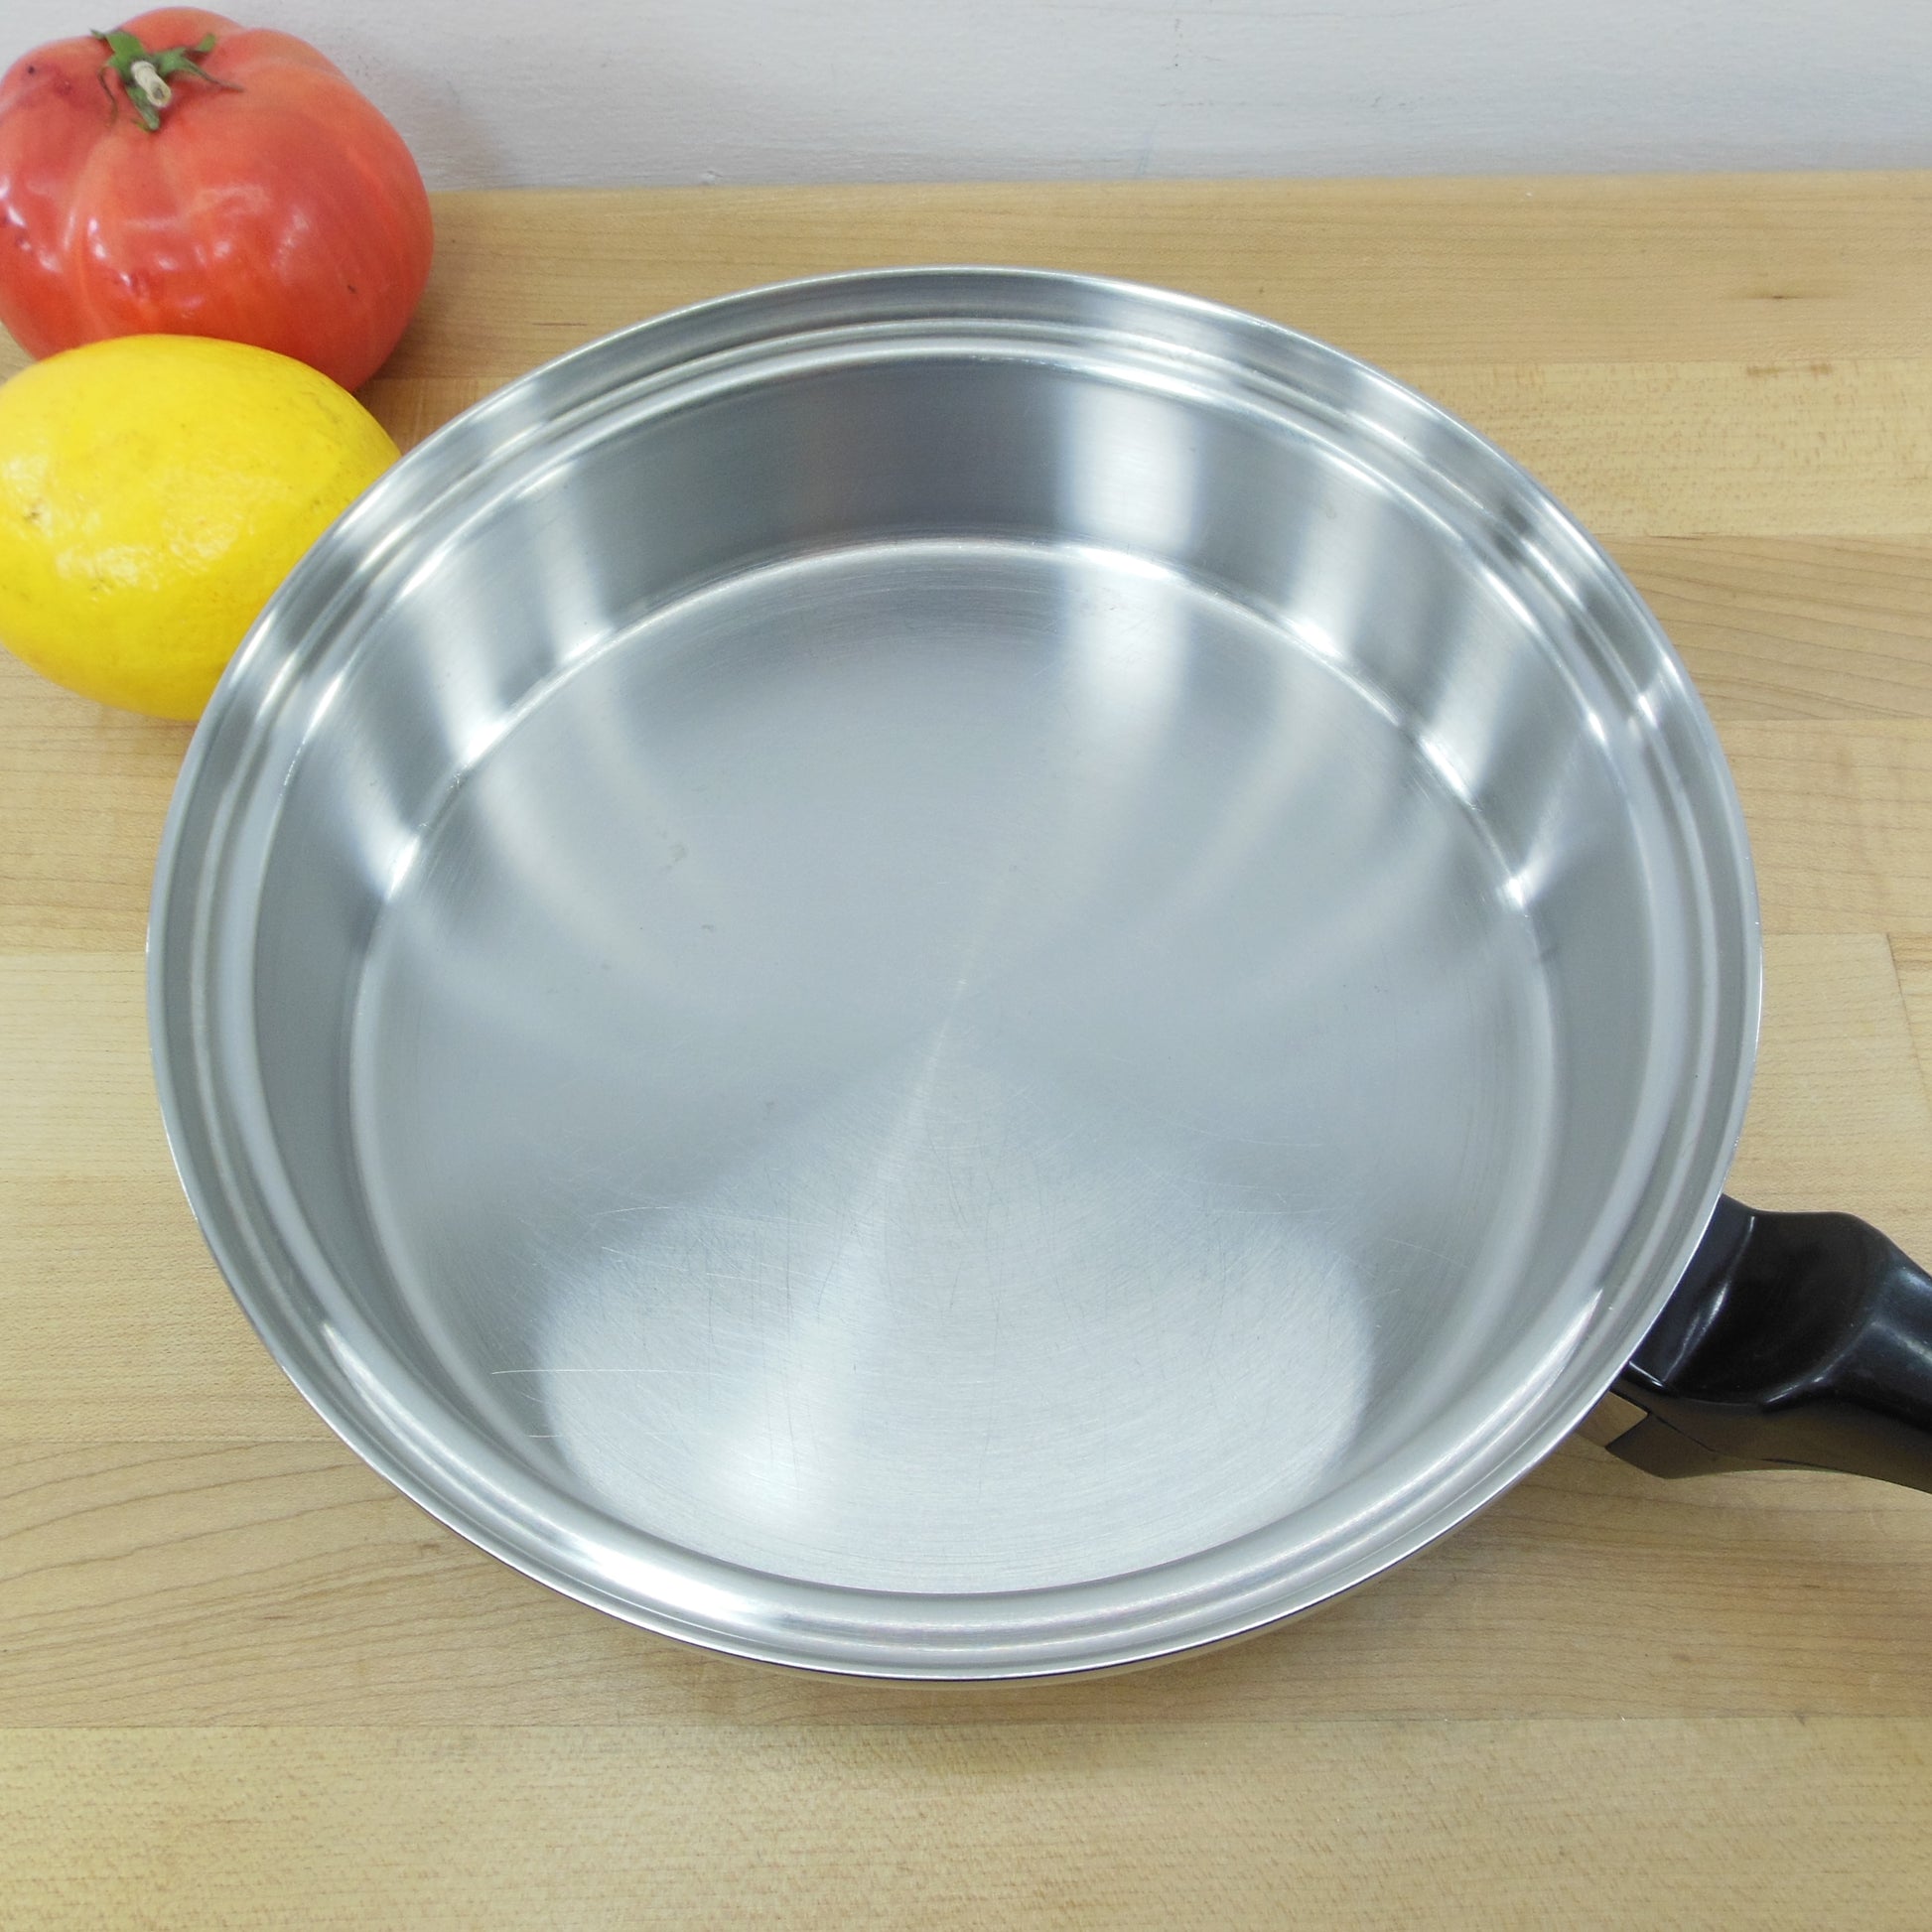 Townecraft Chef's Ware 8" 9" Open Skillet 5 Ply Stainless Vintage